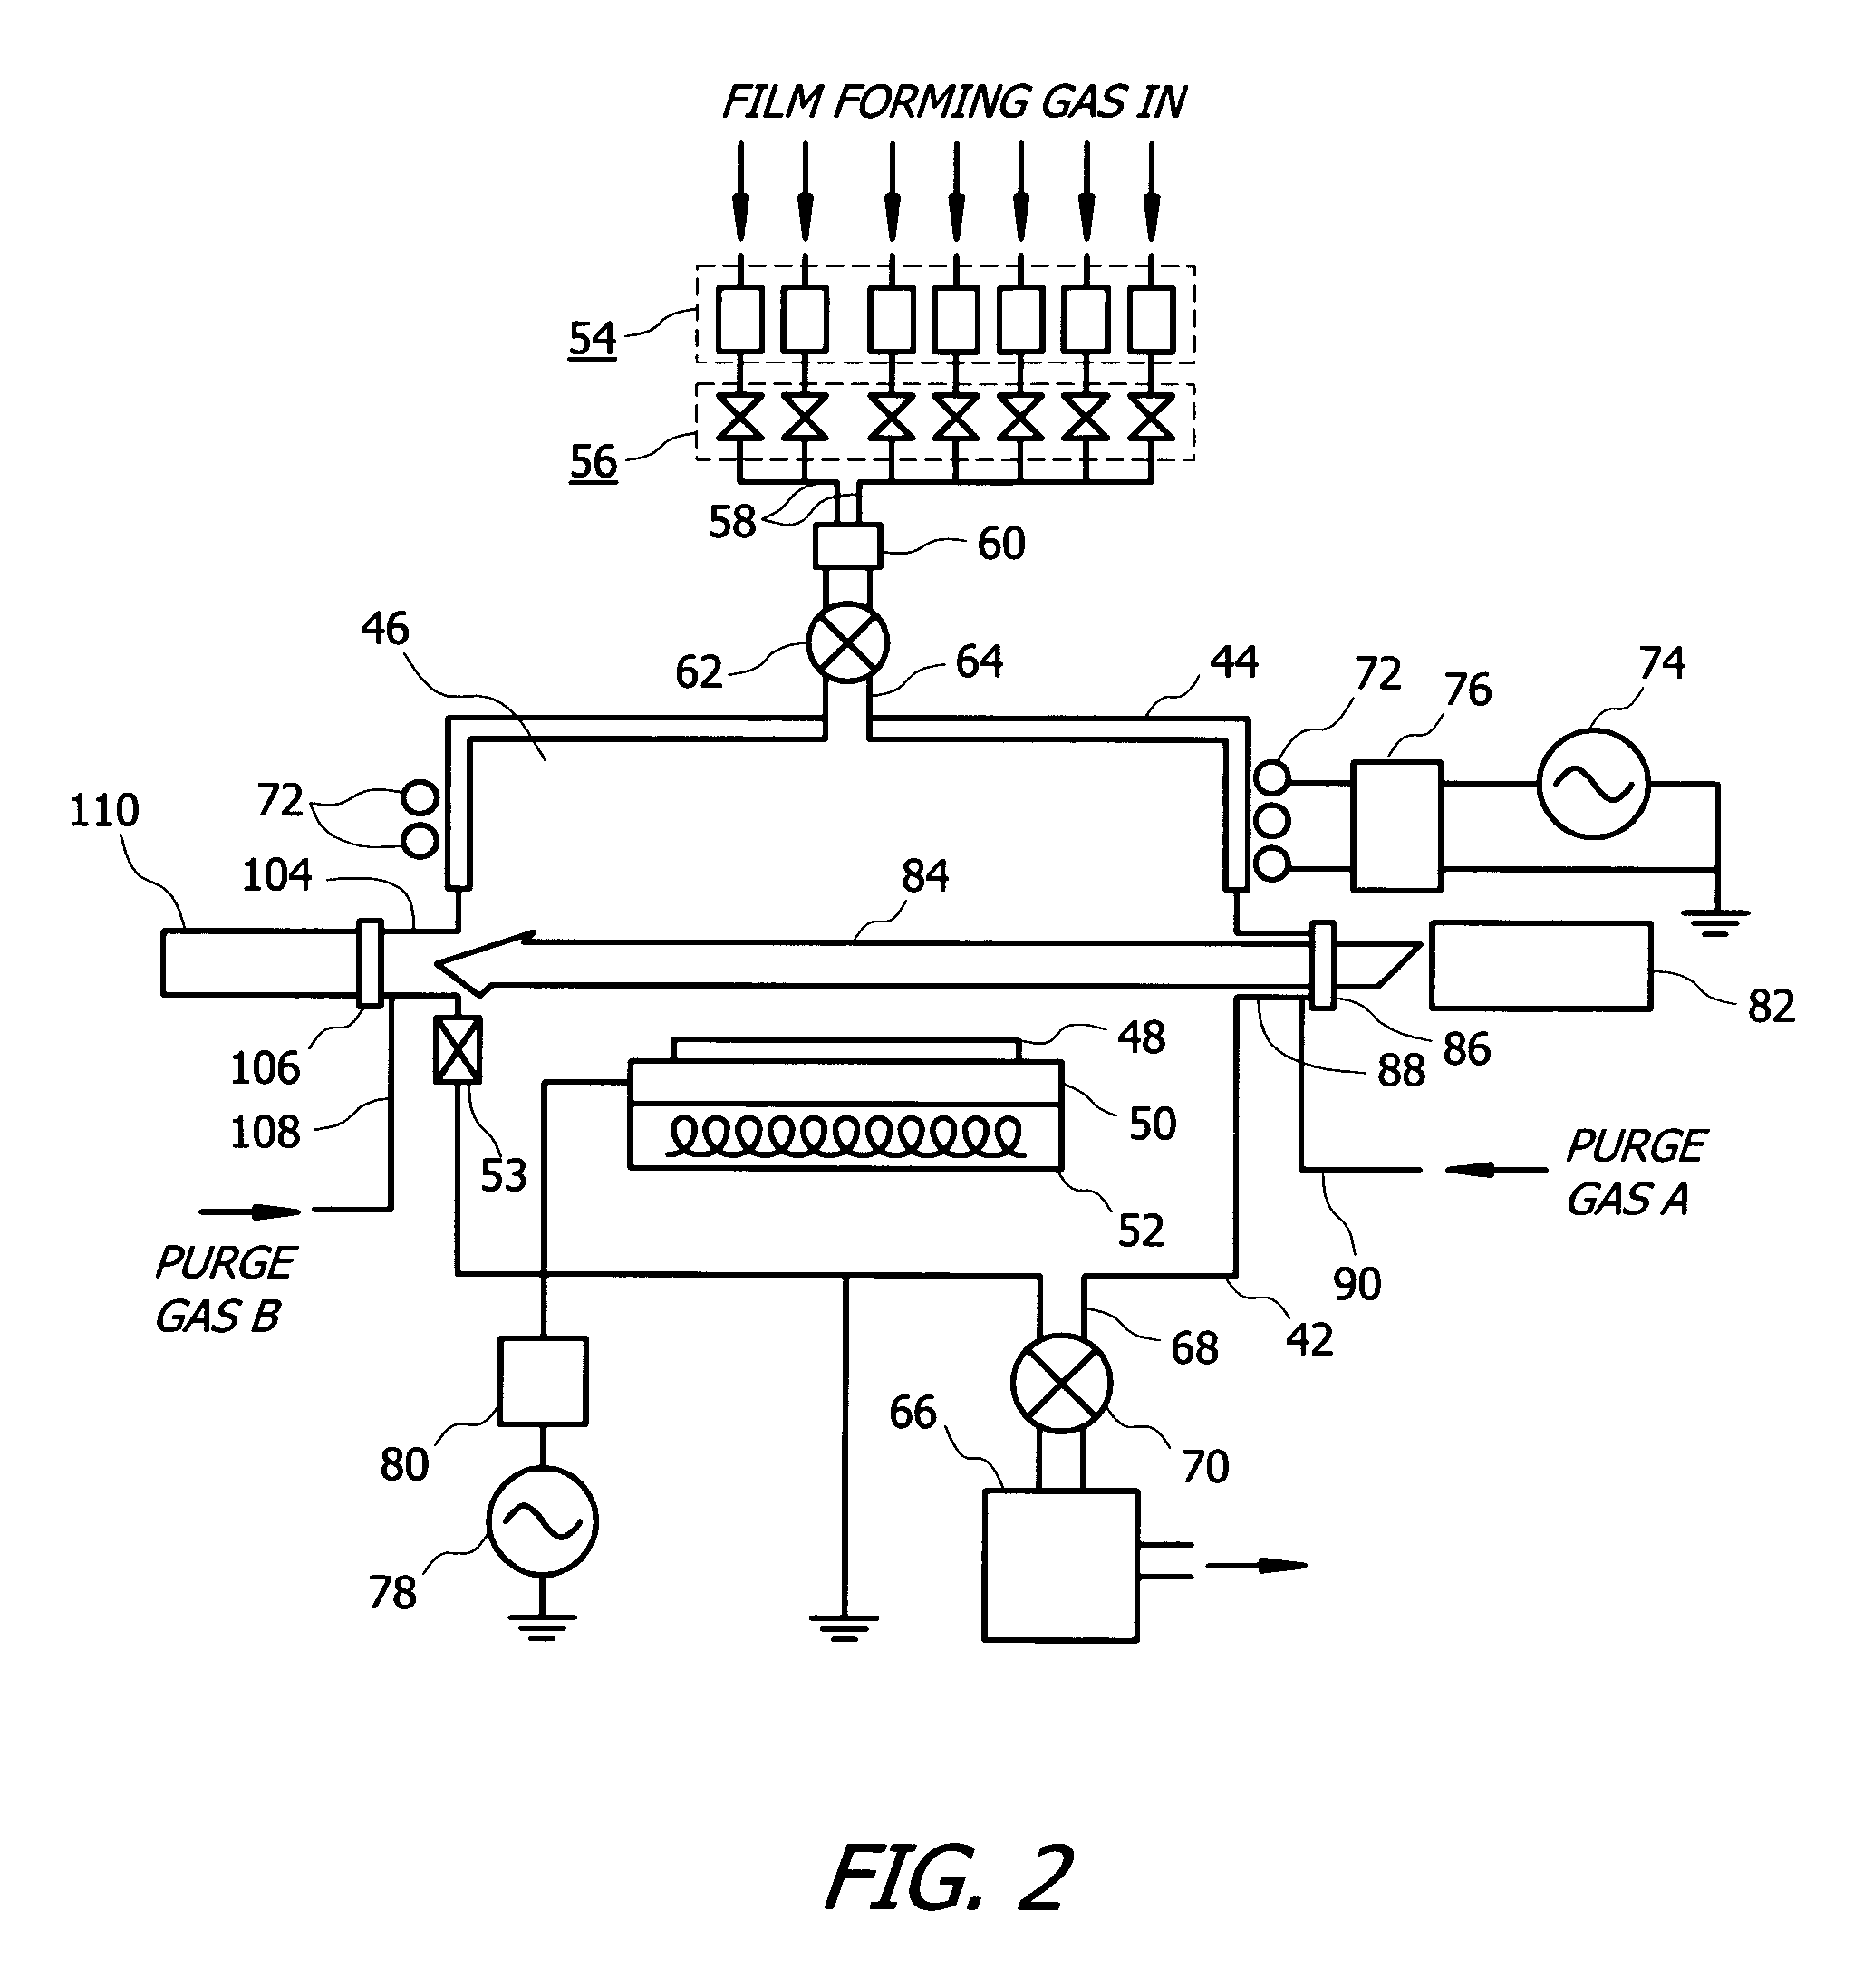 Method for forming a semiconductor film including a film forming gas and decomposing gas while emitting a laser sheet